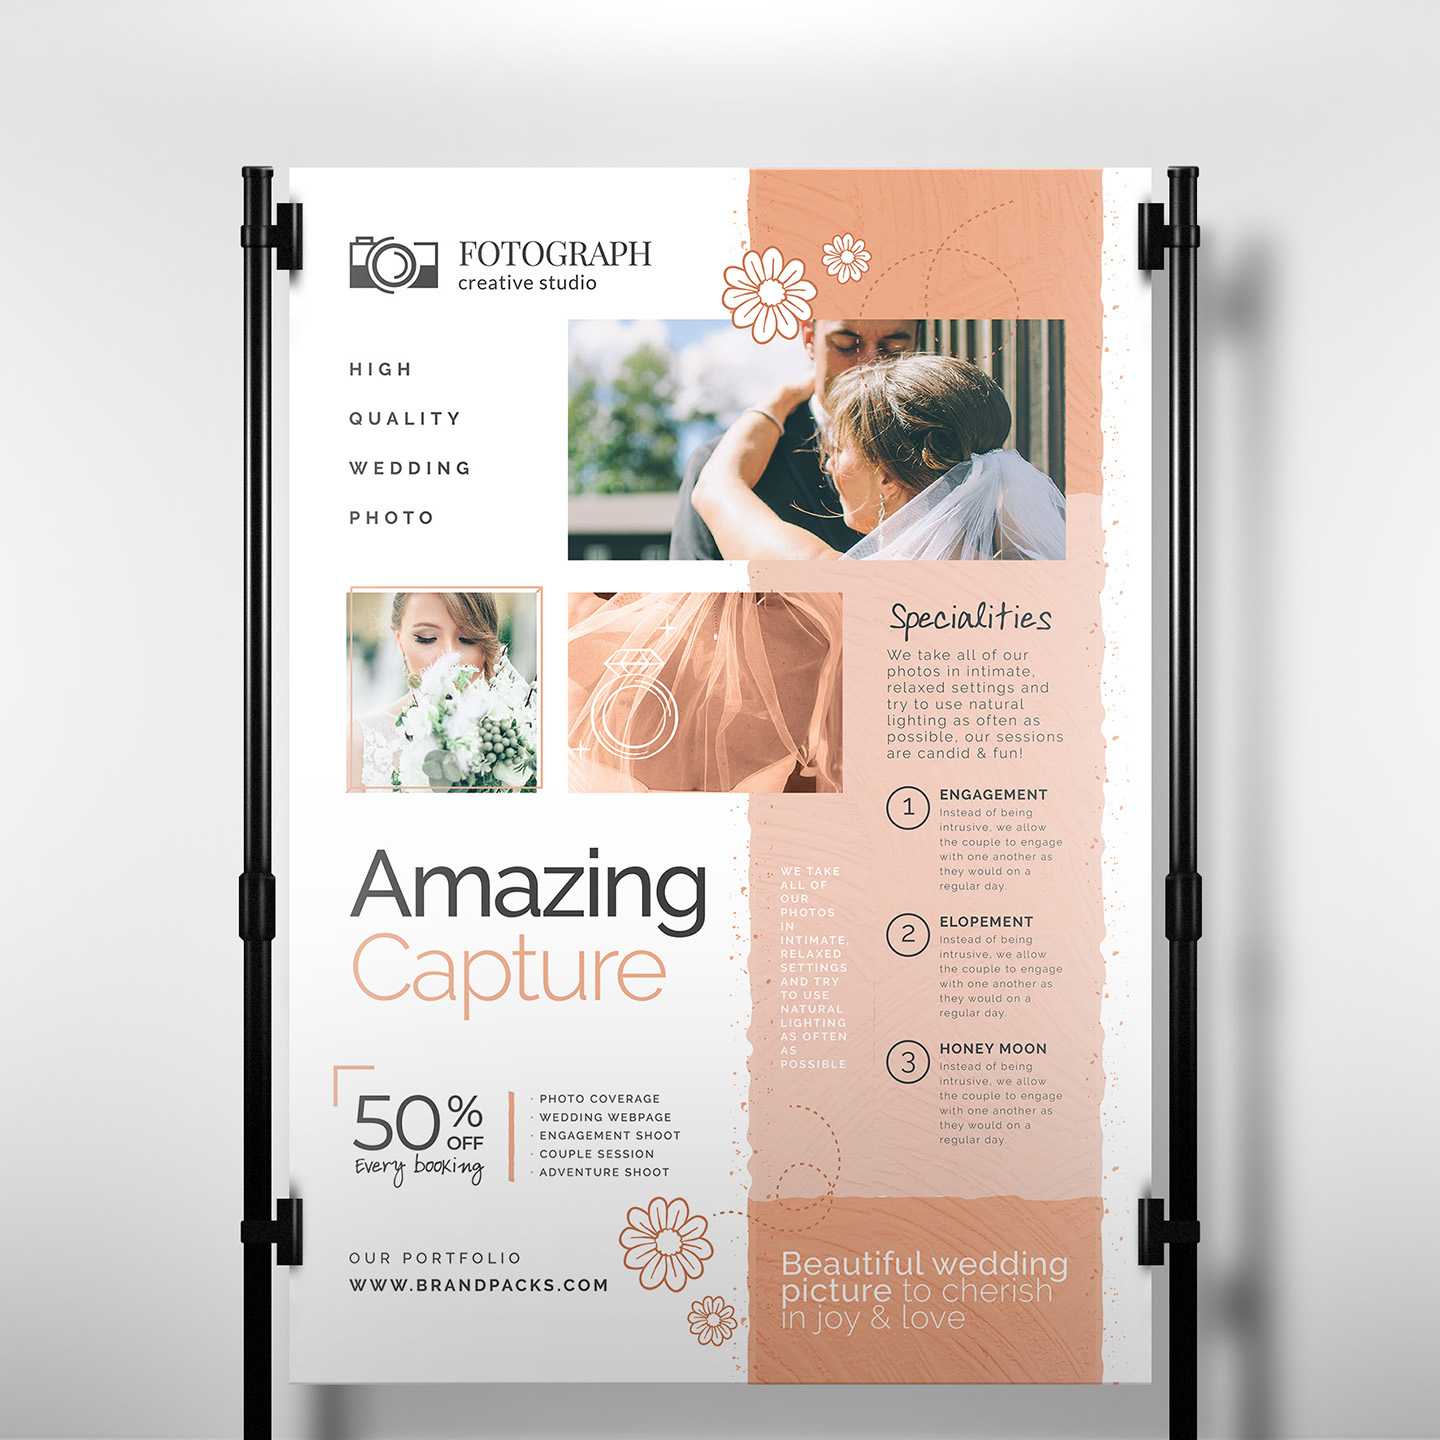 Photography Service Banner Template - Psd, Ai & Vector Inside Photography Banner Template